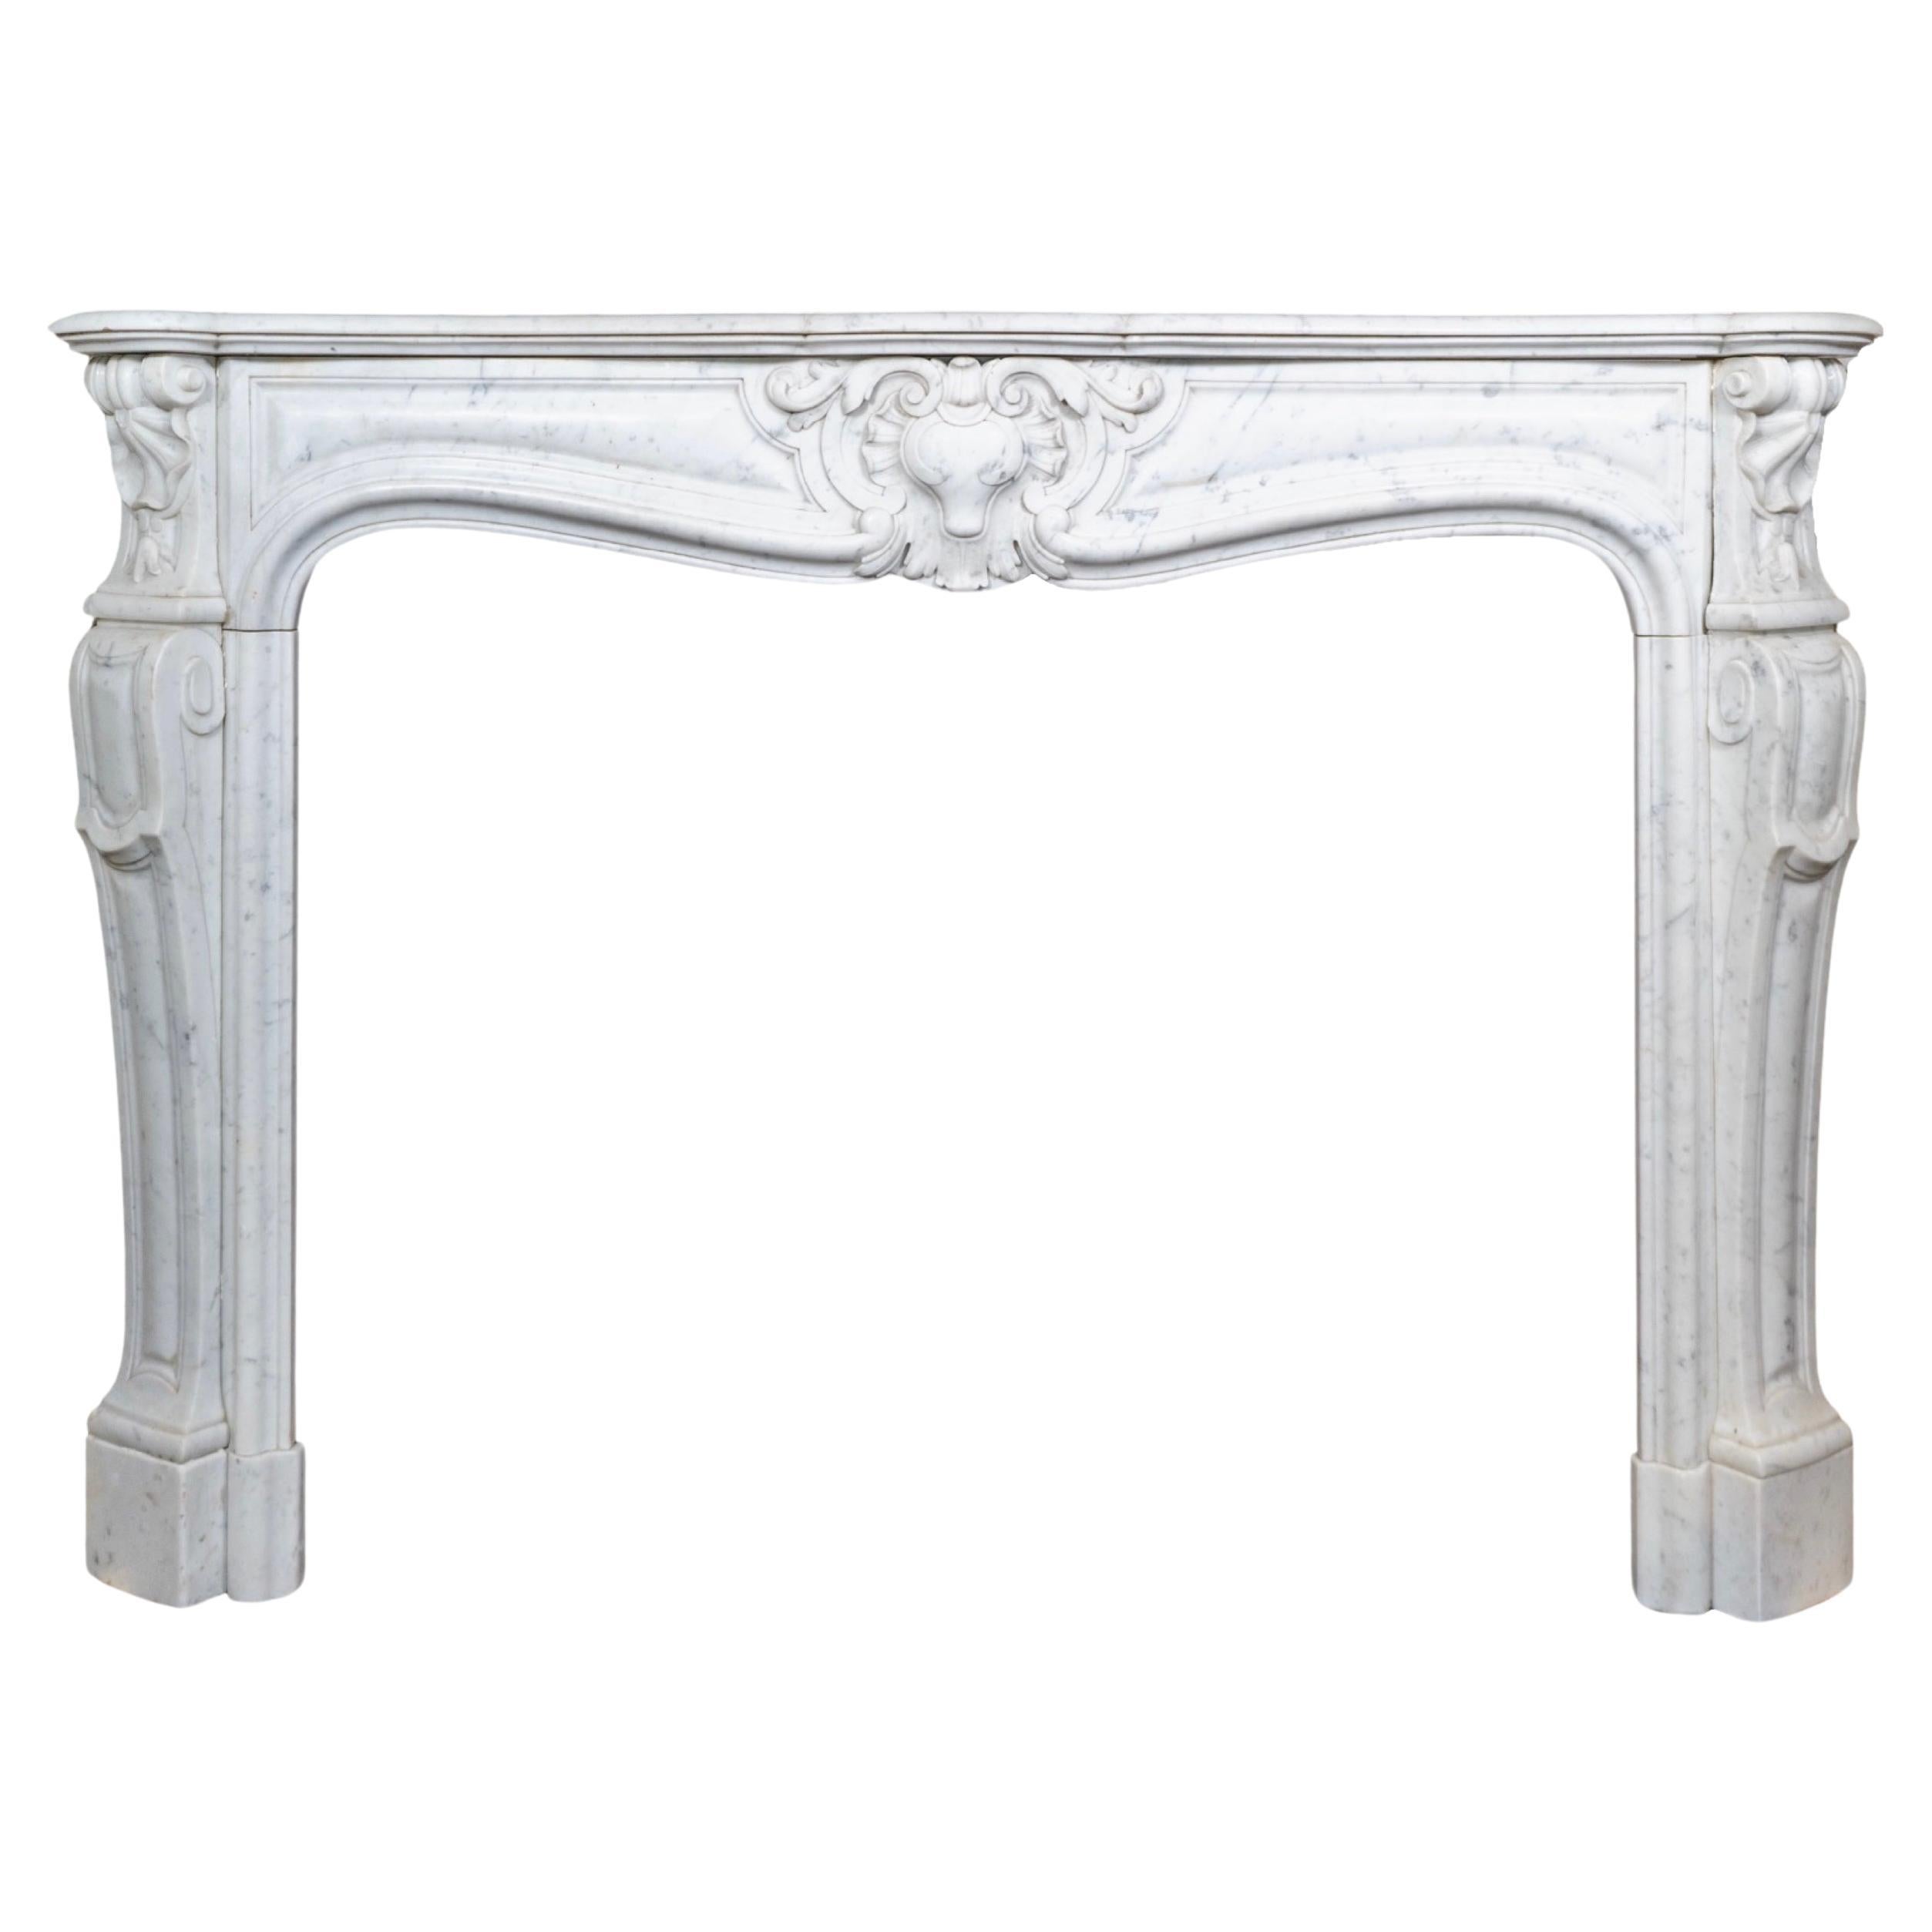 French White Carrara Marble Mantel For Sale